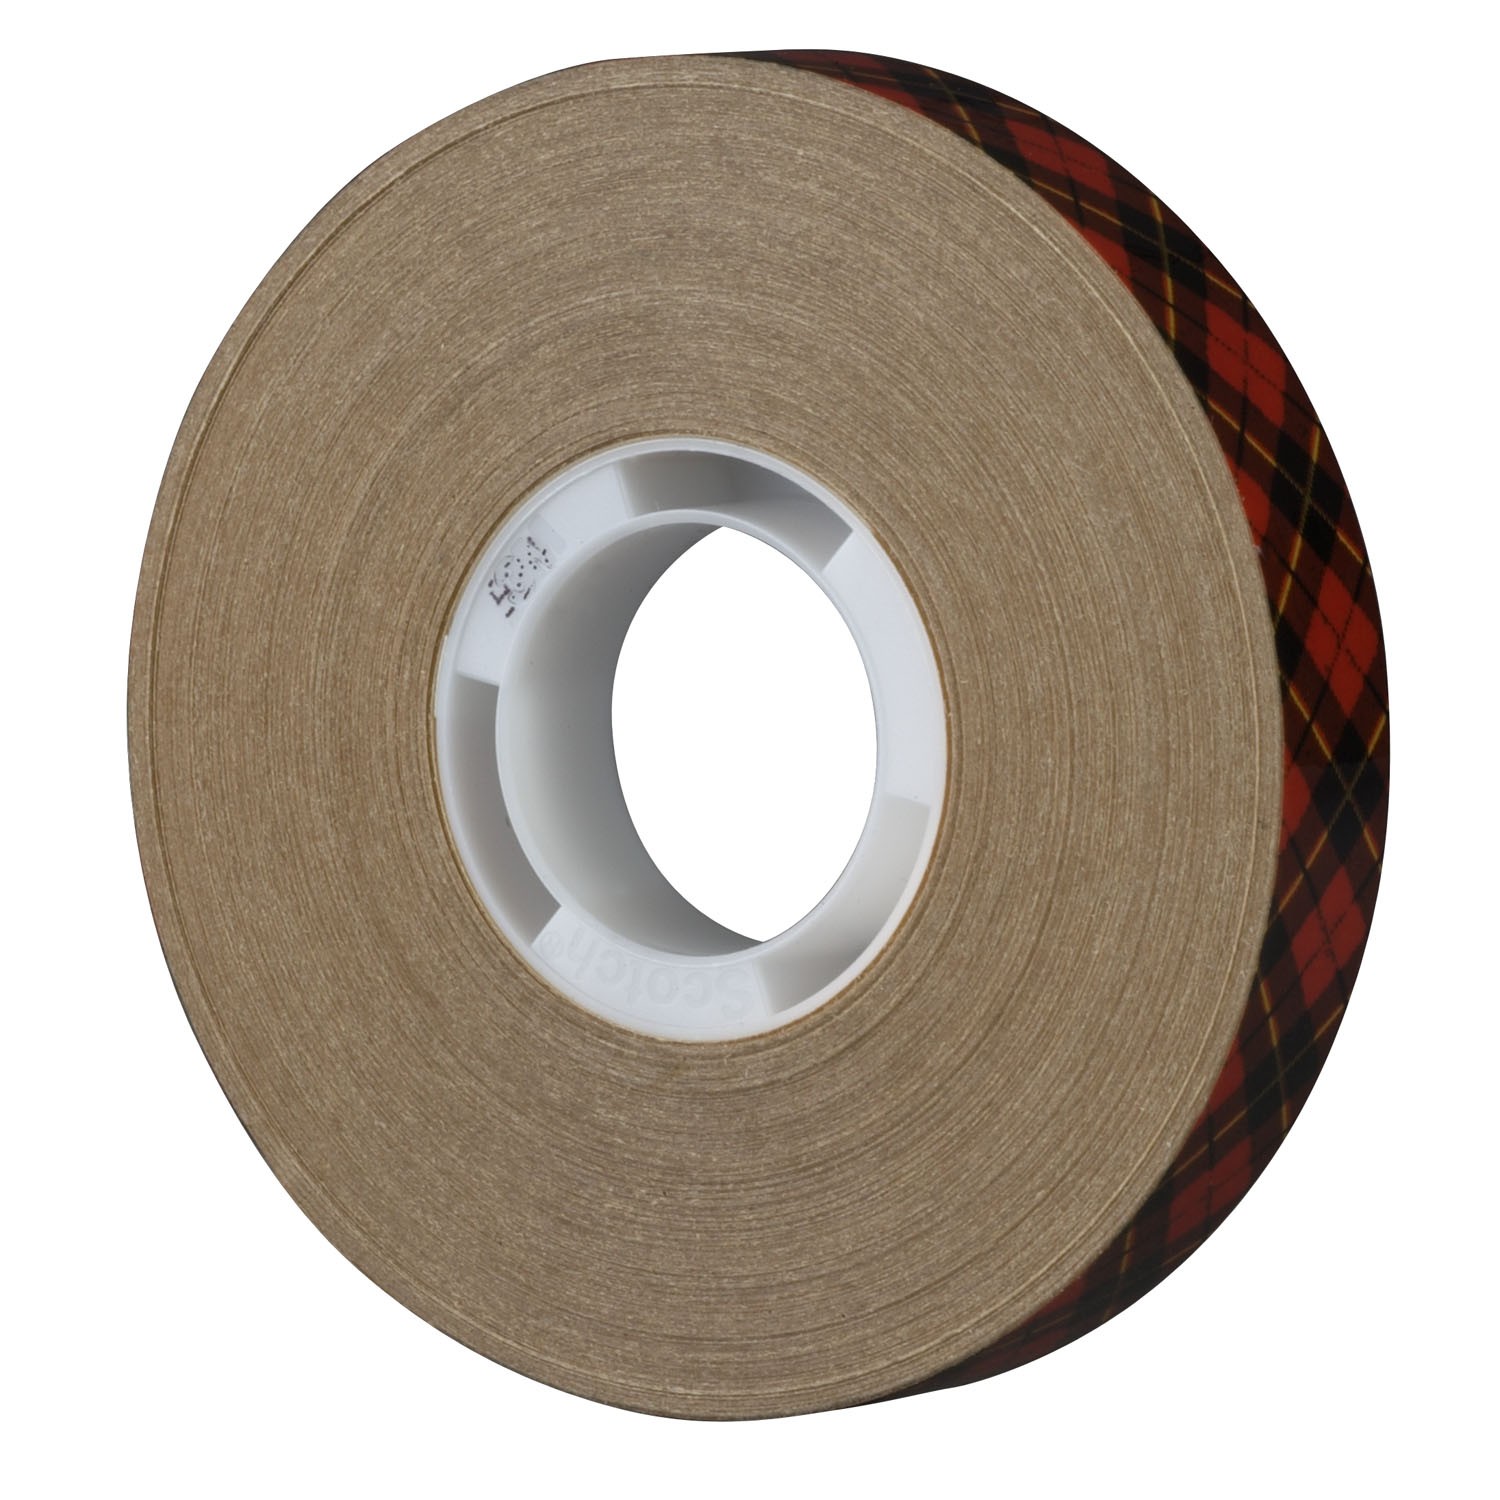 3M ATG926 CLEAR DOUBLE SIDE TAPE 12mm x 33m x 0.13mm SUPPLIER MALAYSIA